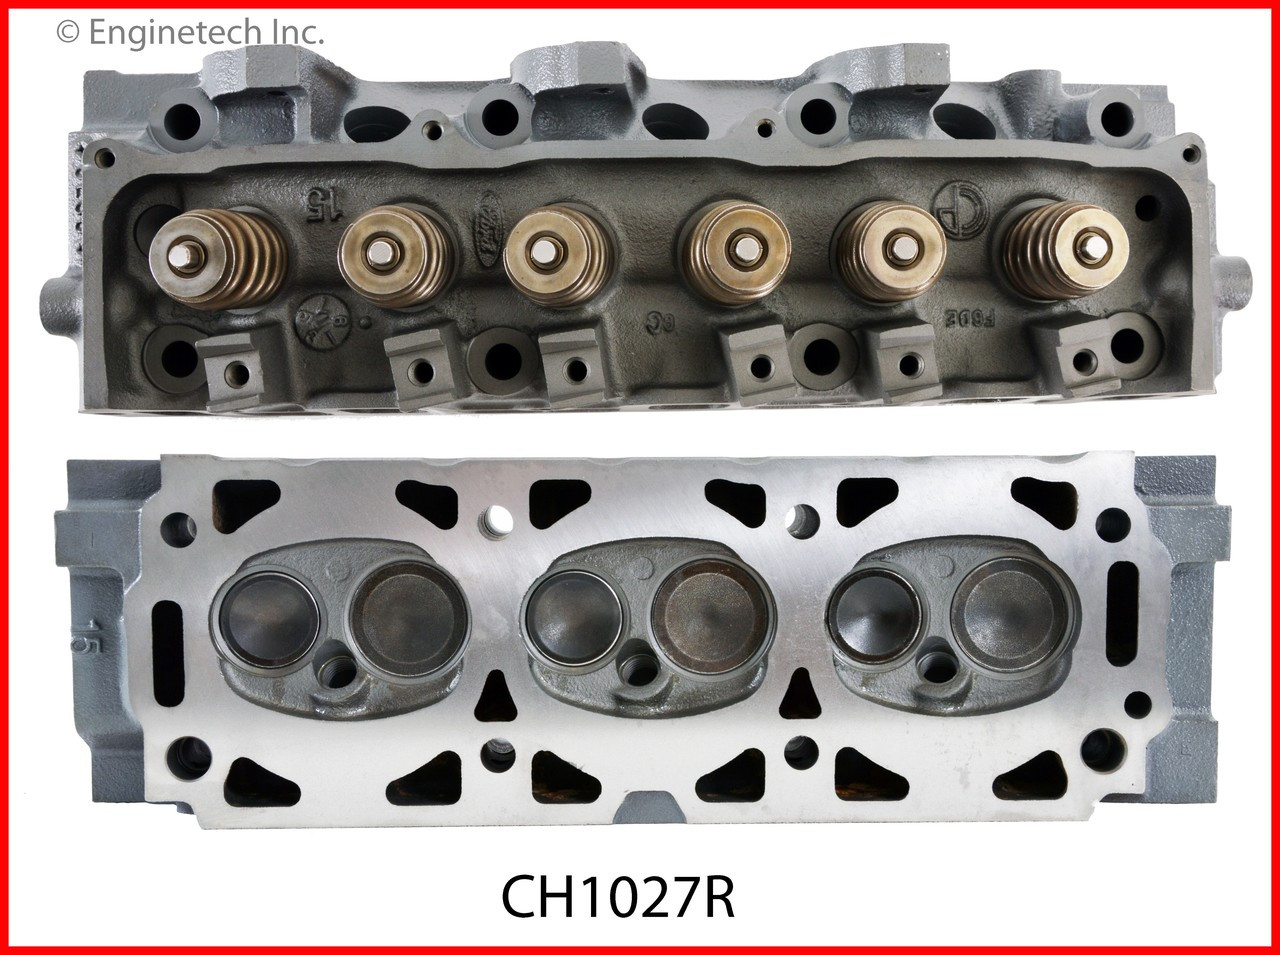 Cylinder Head Assembly - 2007 Ford Taurus 3.0L (CH1027R.E44)